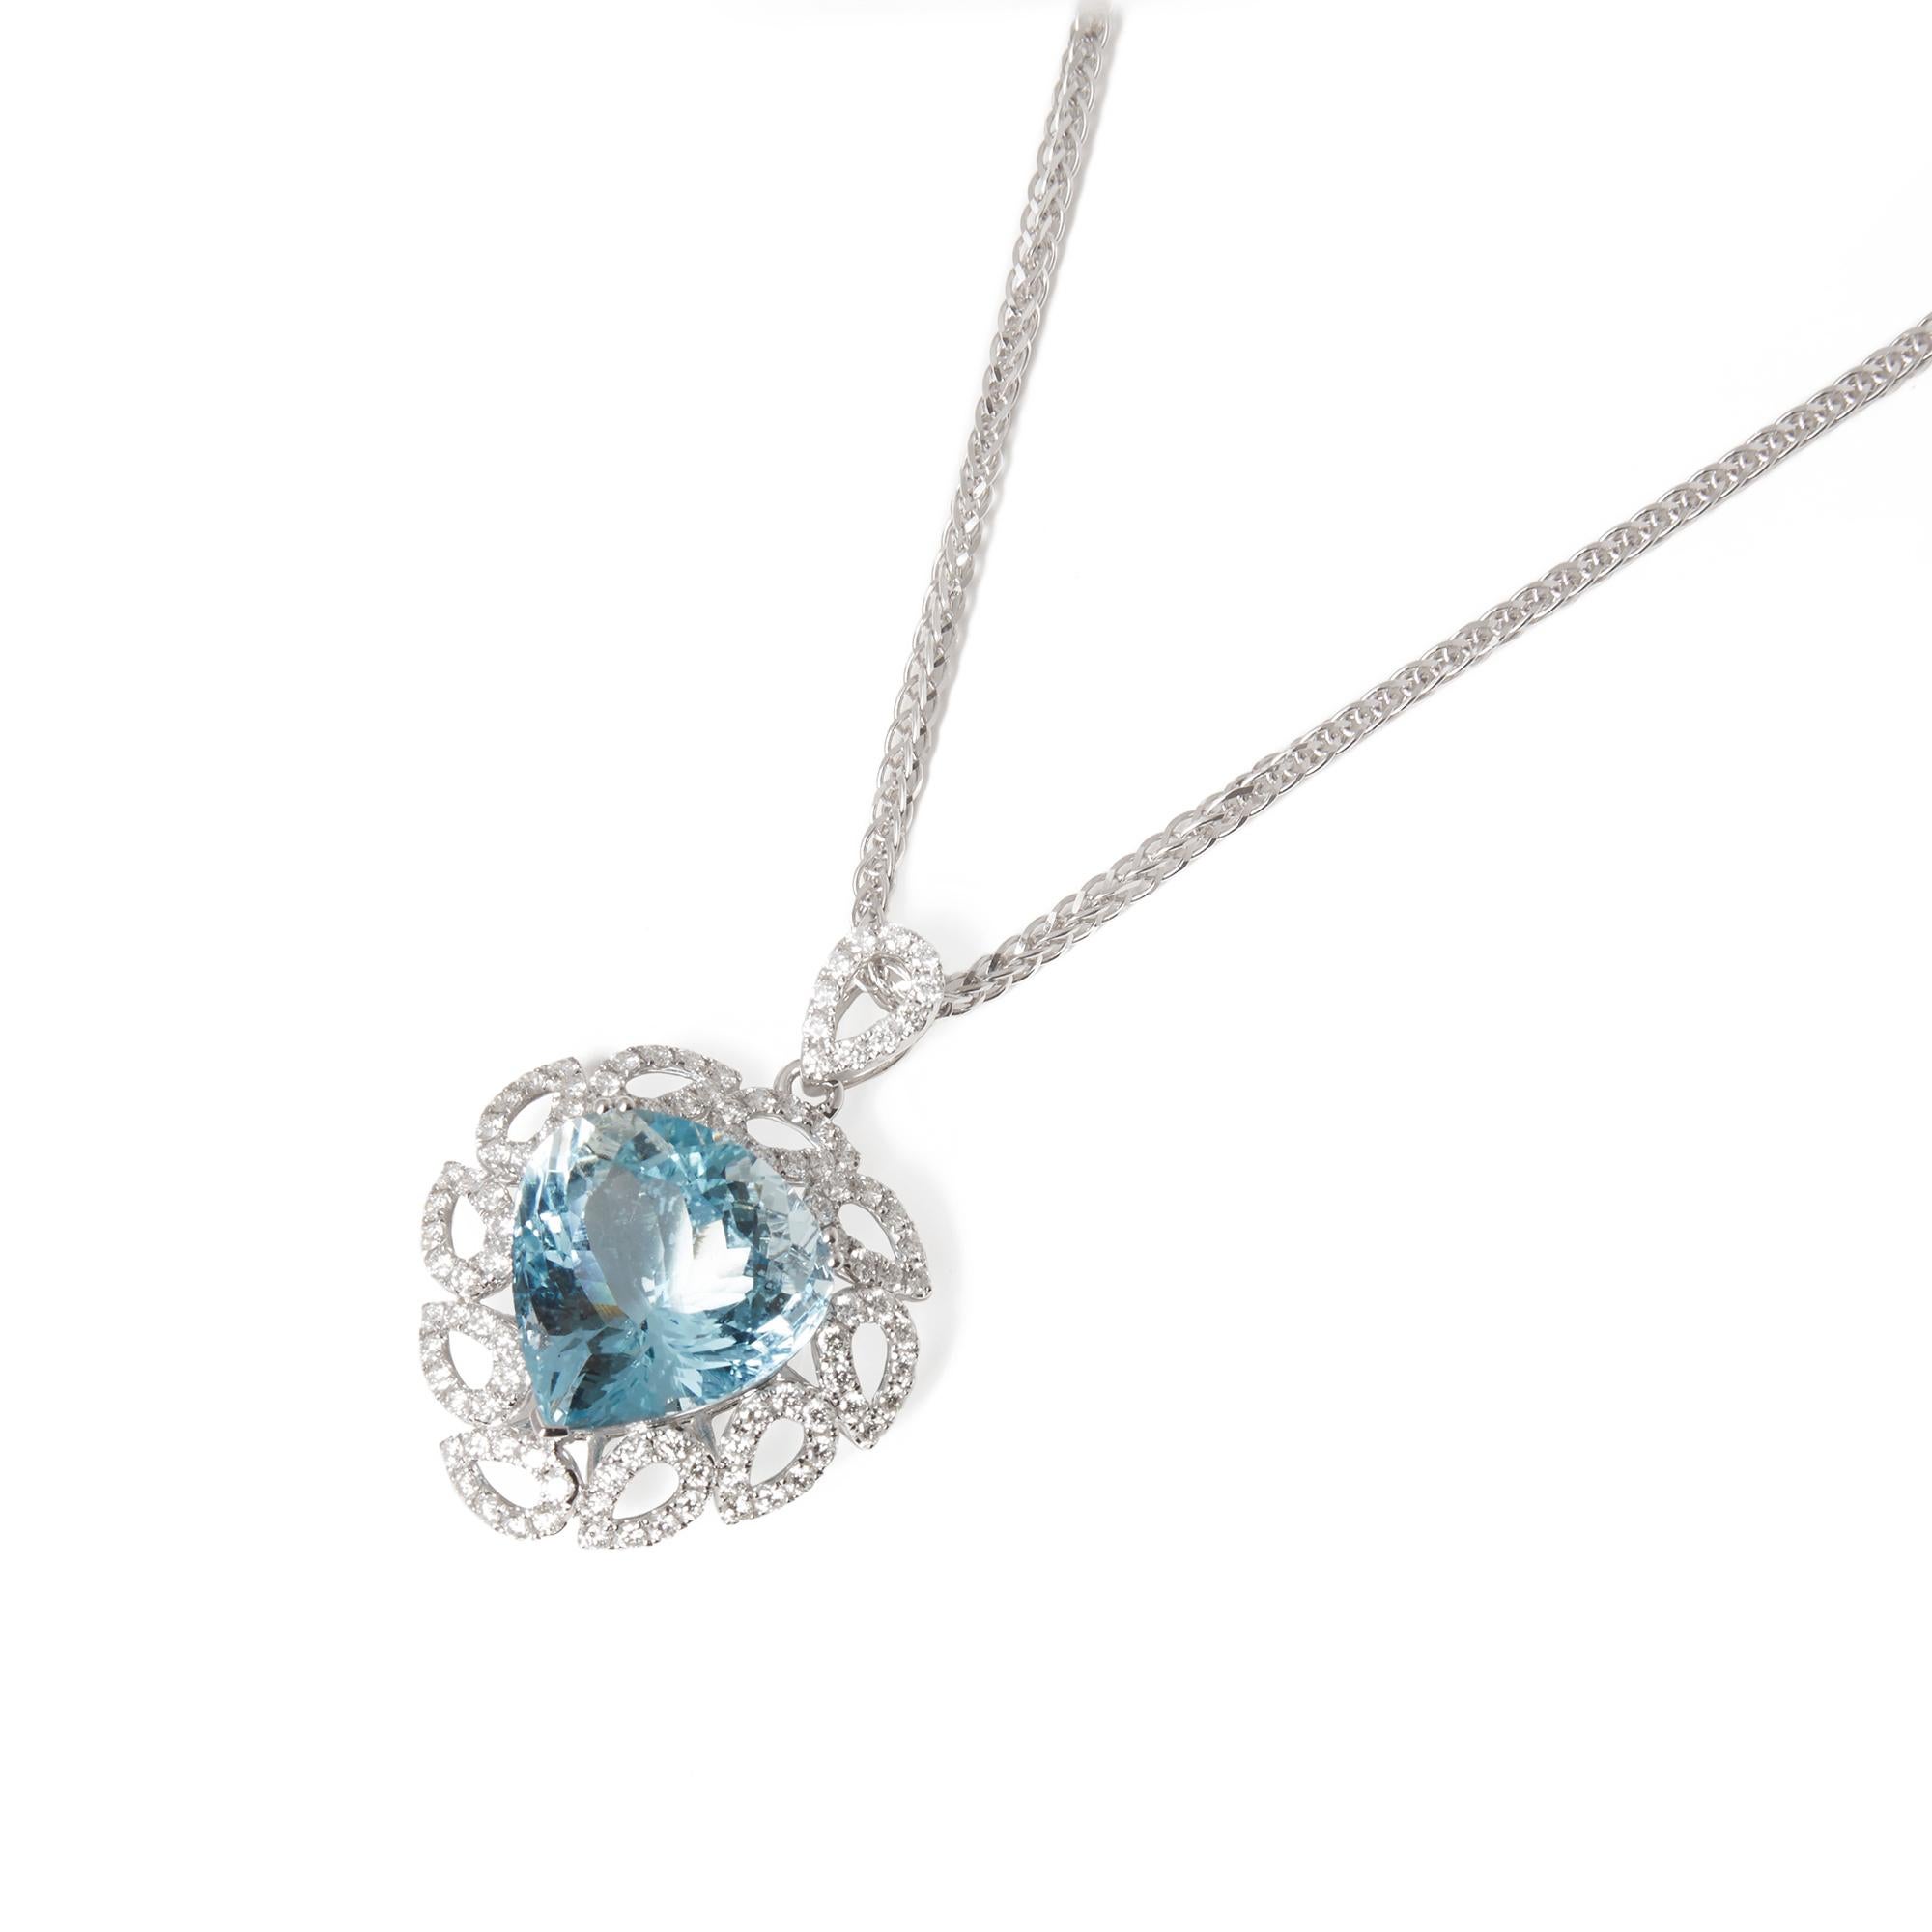 This Pendant designed by David Jerome is from his private collection and features one 13.74ct Trilliant Cut Aquamarine sourced in Brazil. Set with 1.52ct round brilliant cut diamonds mounted in an 18k white gold setting. 

David prides himself in